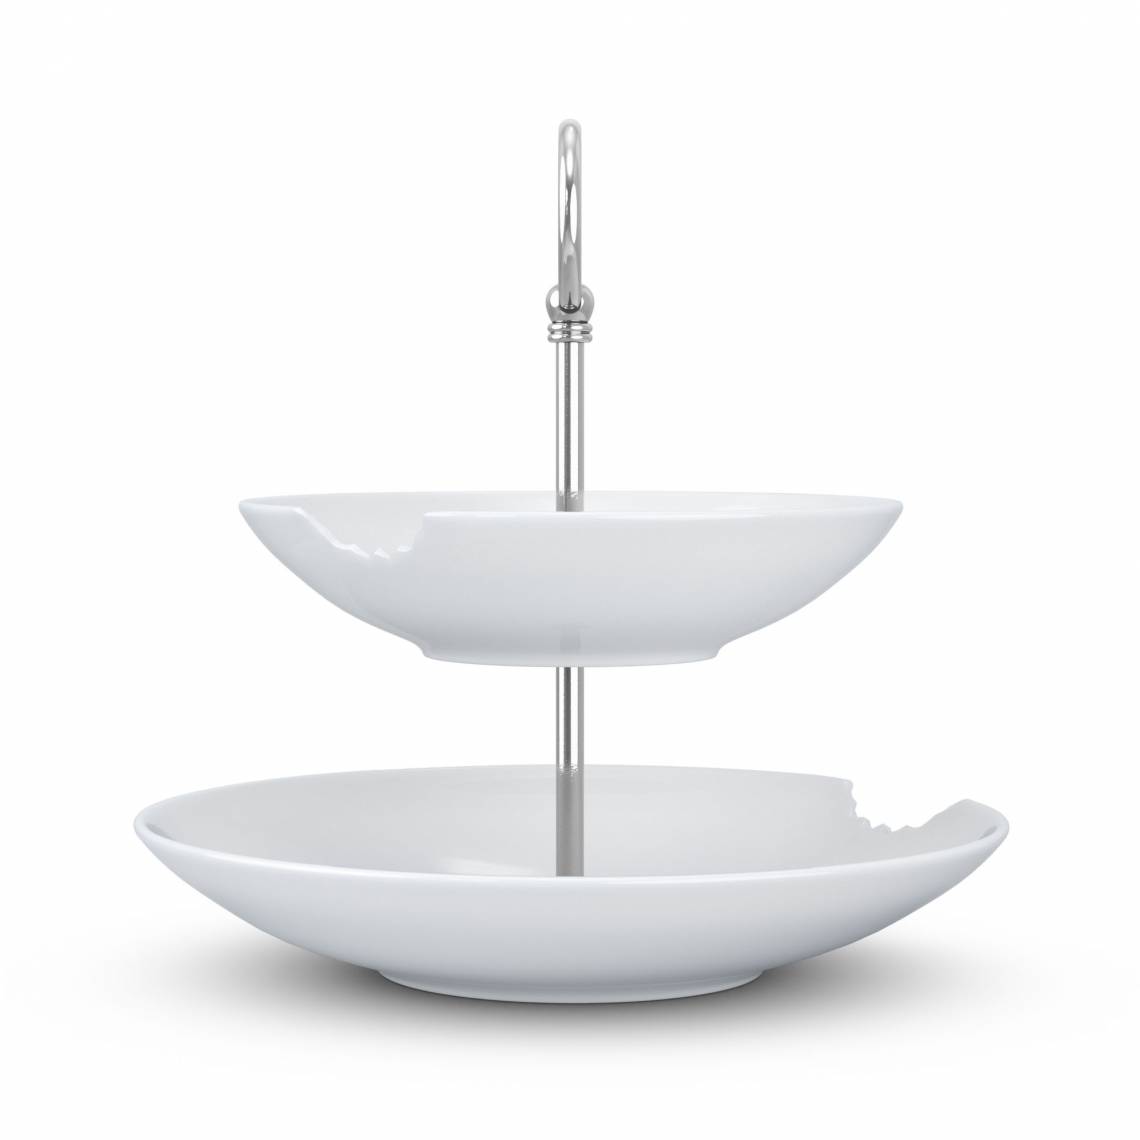 58Products--T023501_Food-Tempel_zweiteilig_weiss_Etagere